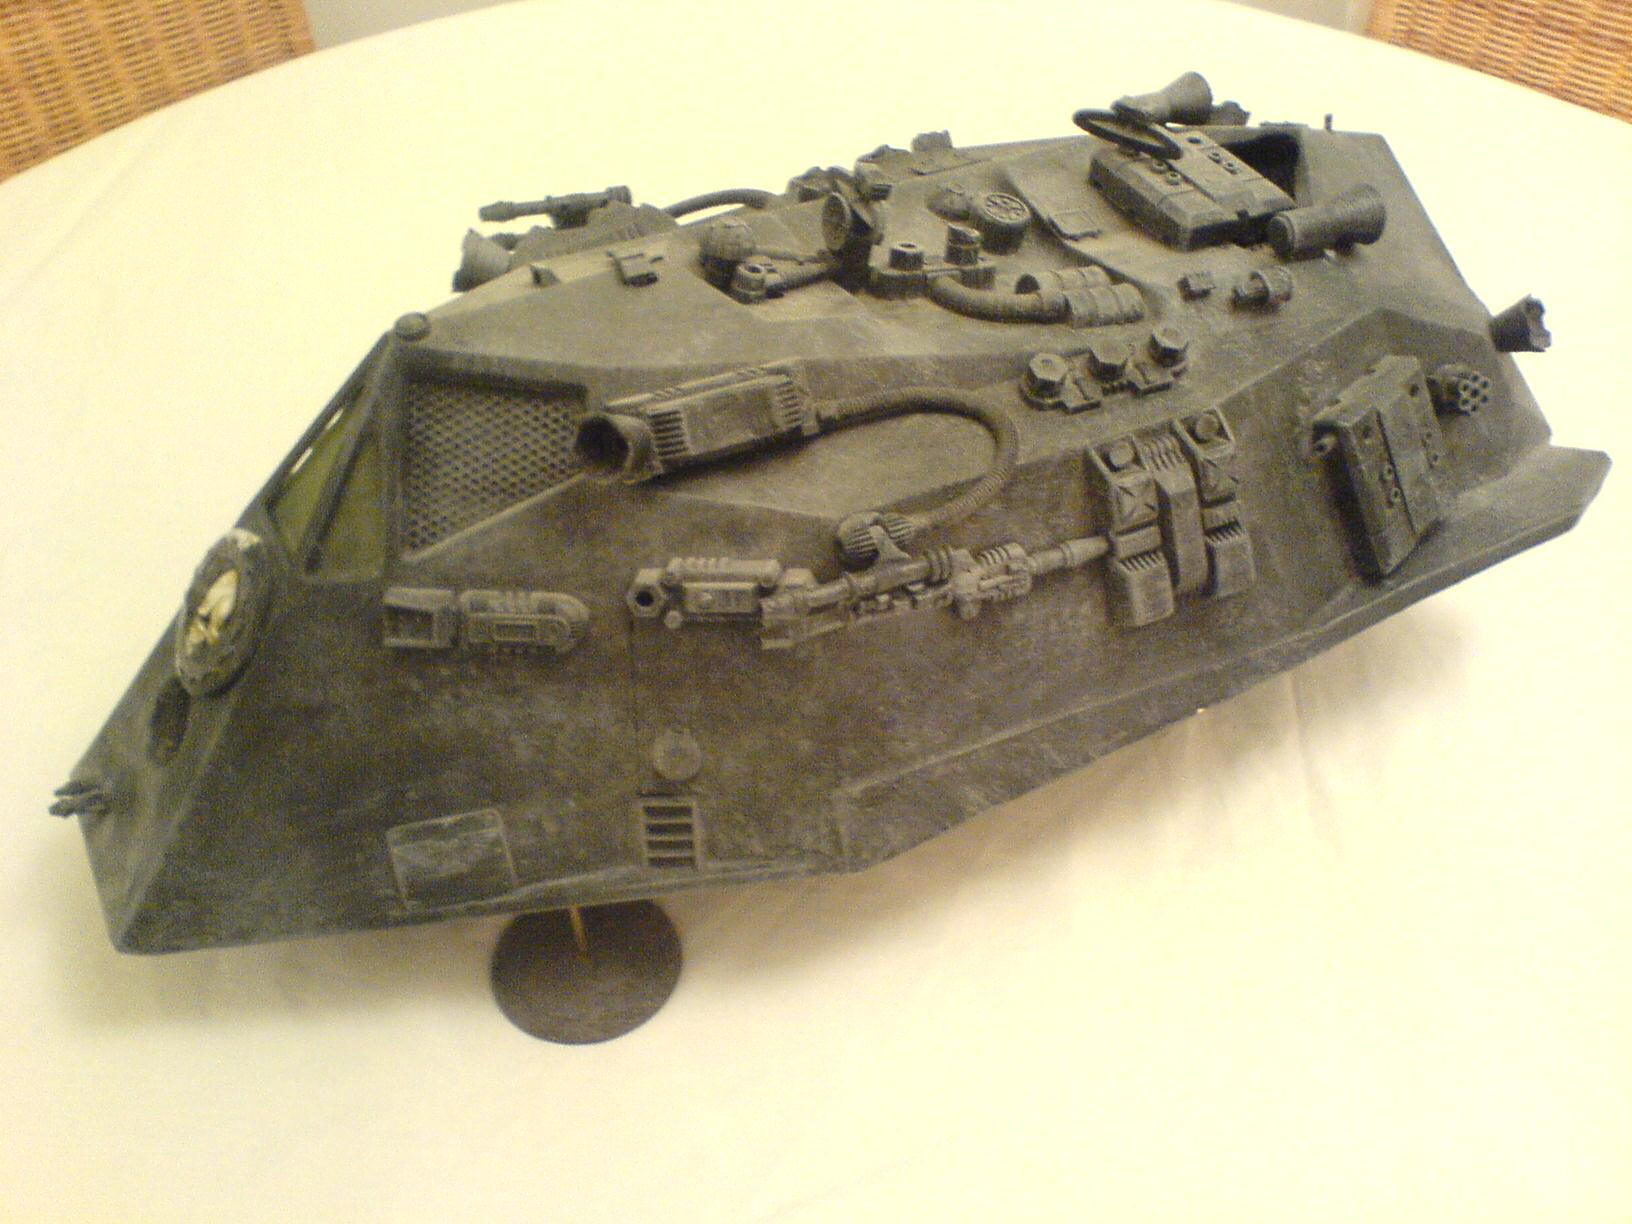 Conversion, Drop Ship, Imperial Guard, Toy, Warhammer 40,000